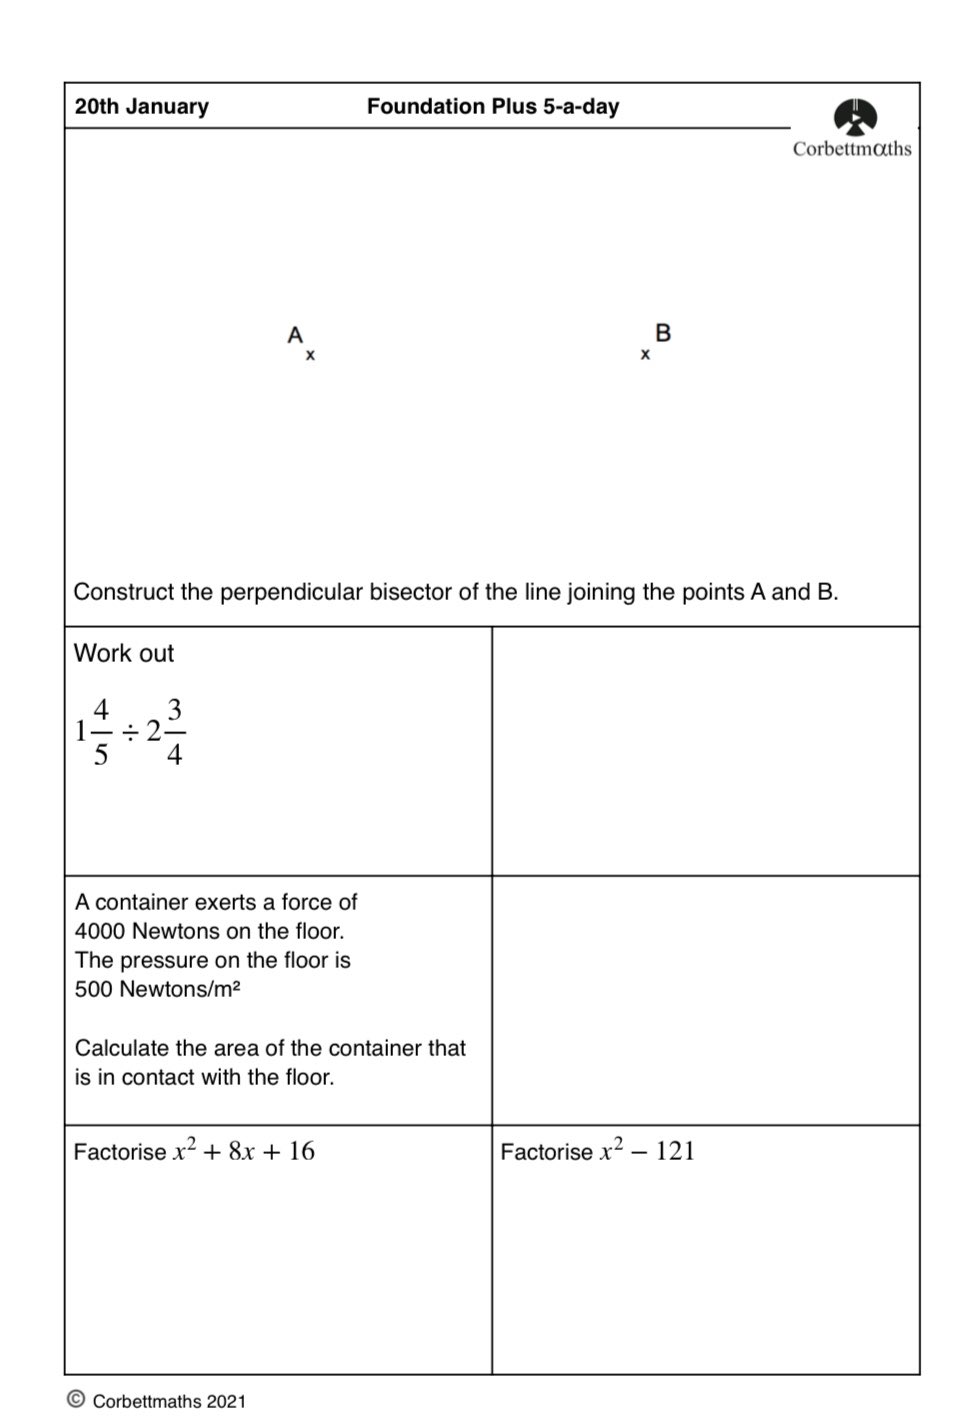 Corbettmaths On Twitter Studying For Foundation Gcse Maths Try Today S Foundation Or The Challenging Foundation Plus Maths5aday Answers Https T Co Svlnkybp0k Https T Co Tix60elhmf Twitter